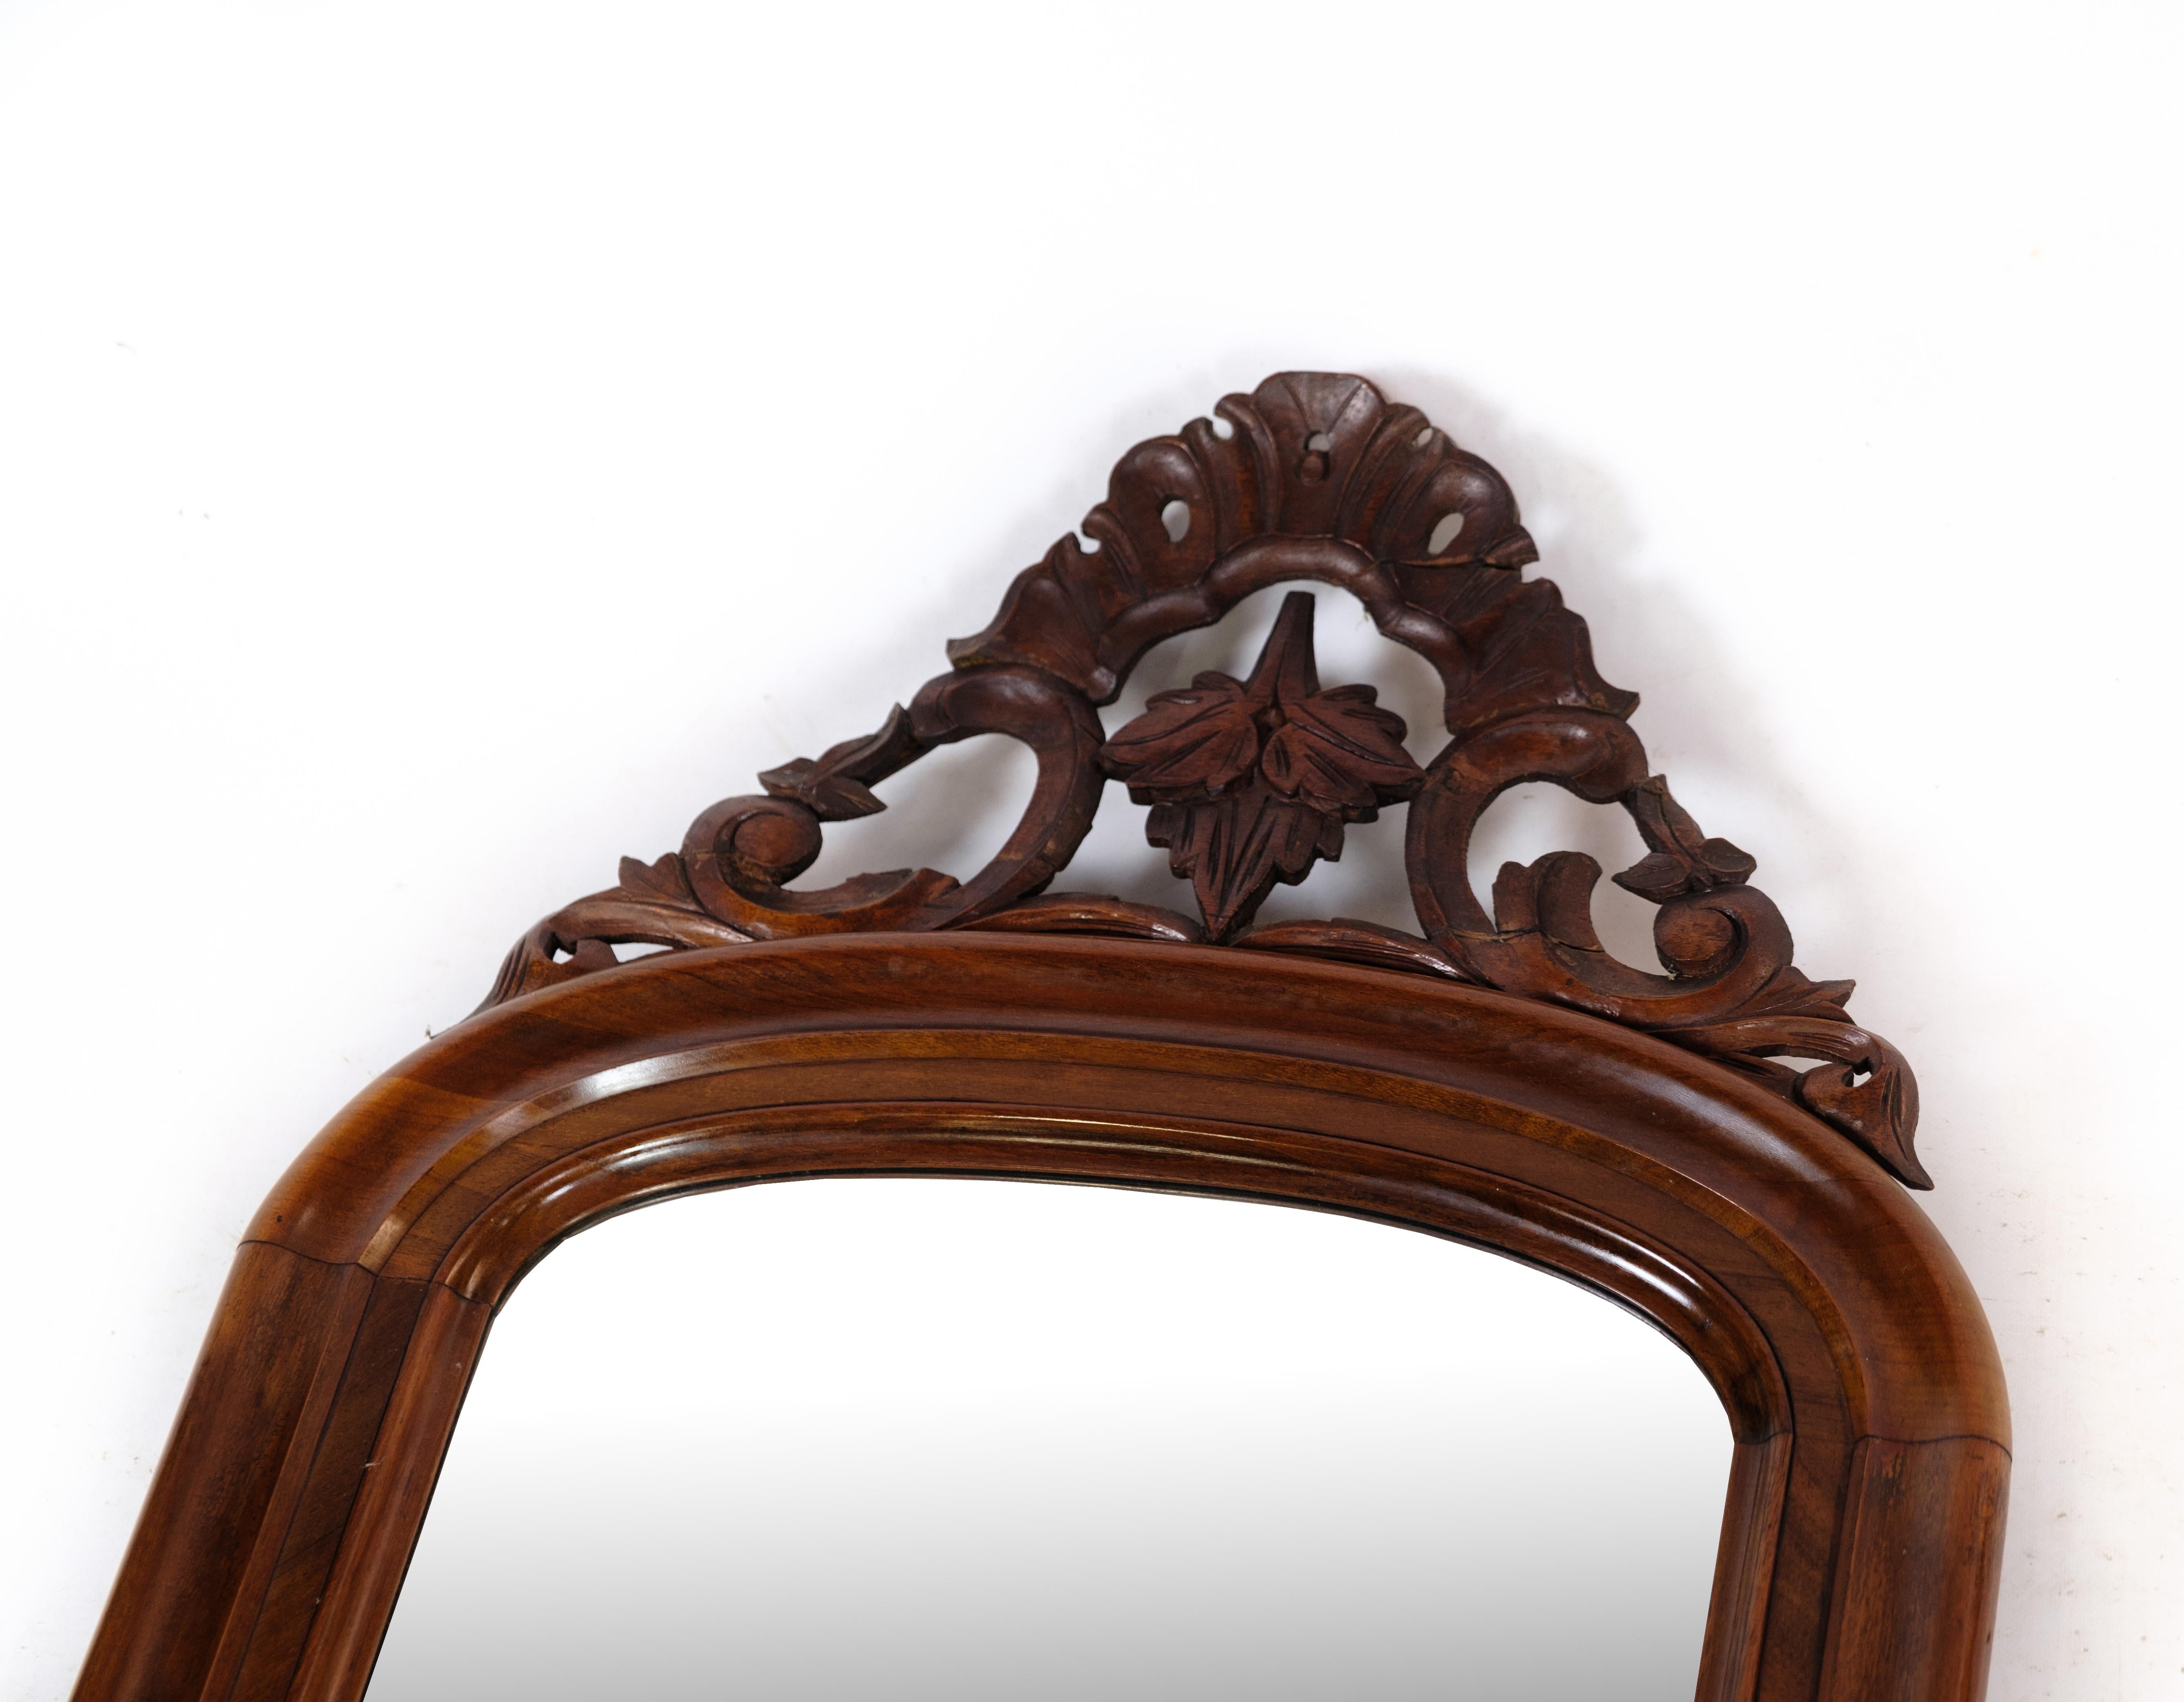 Antique mirror in mahogany wood, decorated with carvings from around the 1860s.
Dimensions in cm: H:127 W:53.